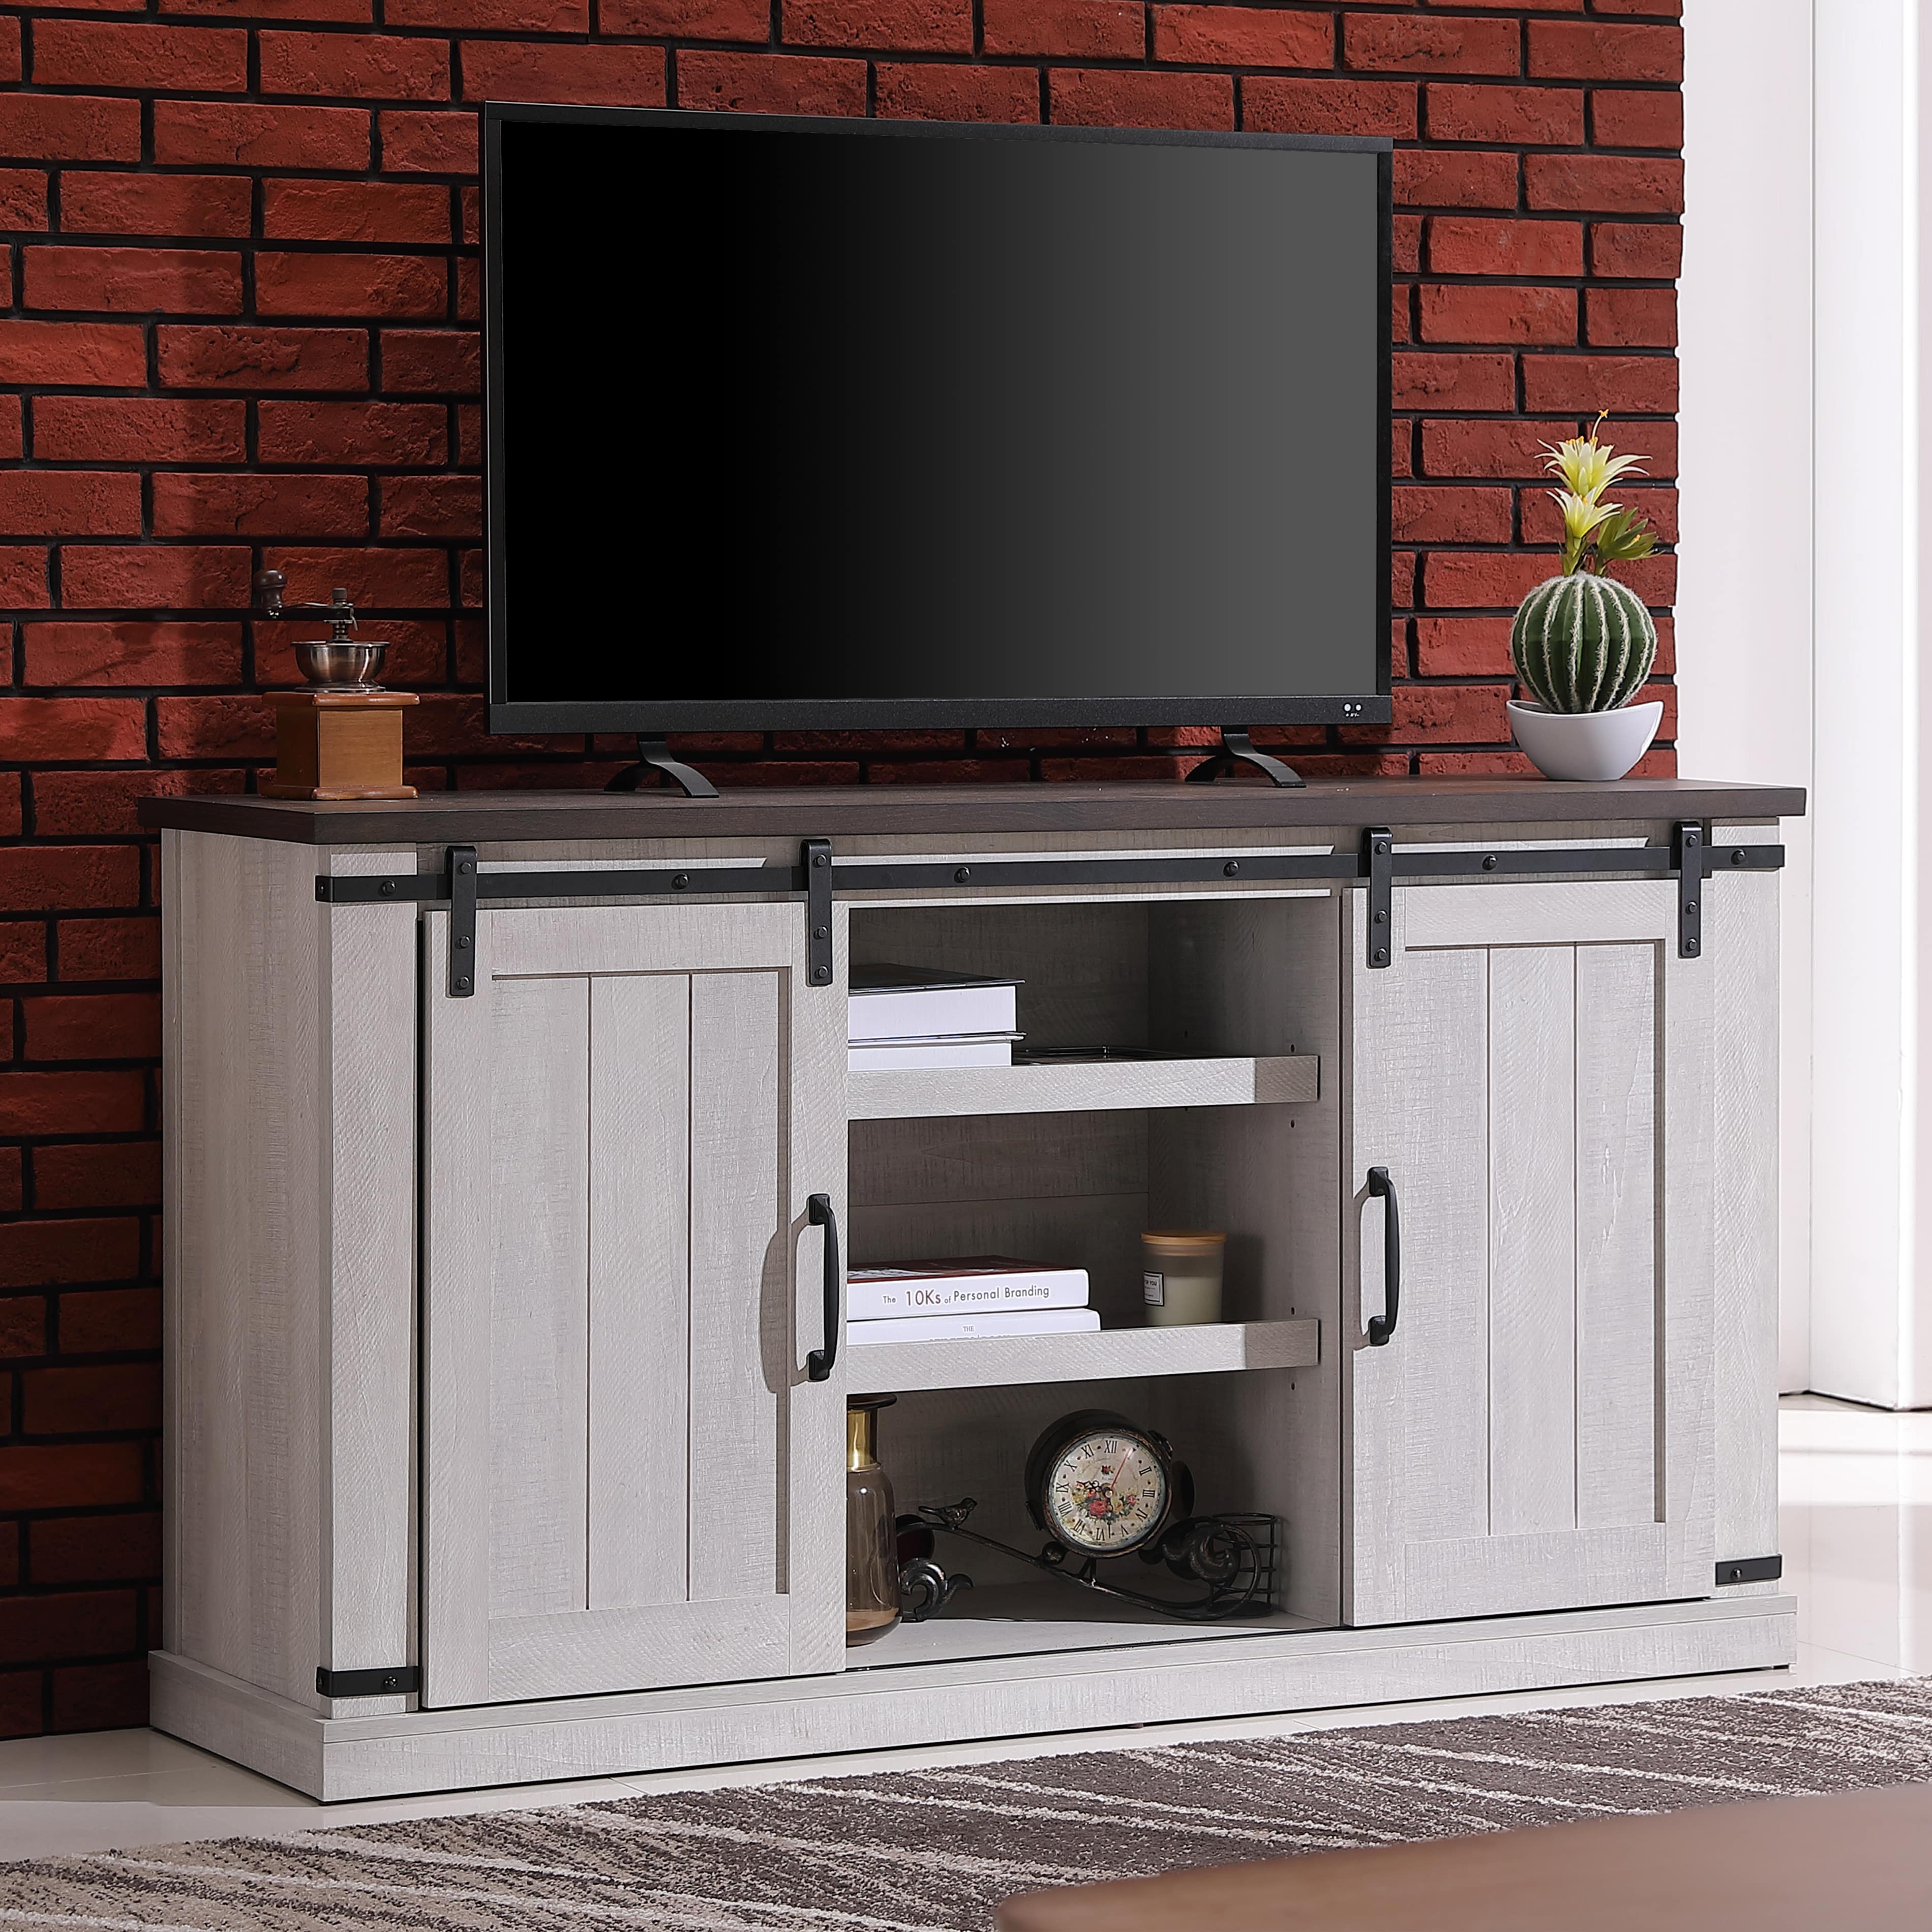 Richseat Barn Door TV Stand, Fits Most 60'' Flat Panel TVs, White Oak Finish - image 1 of 13